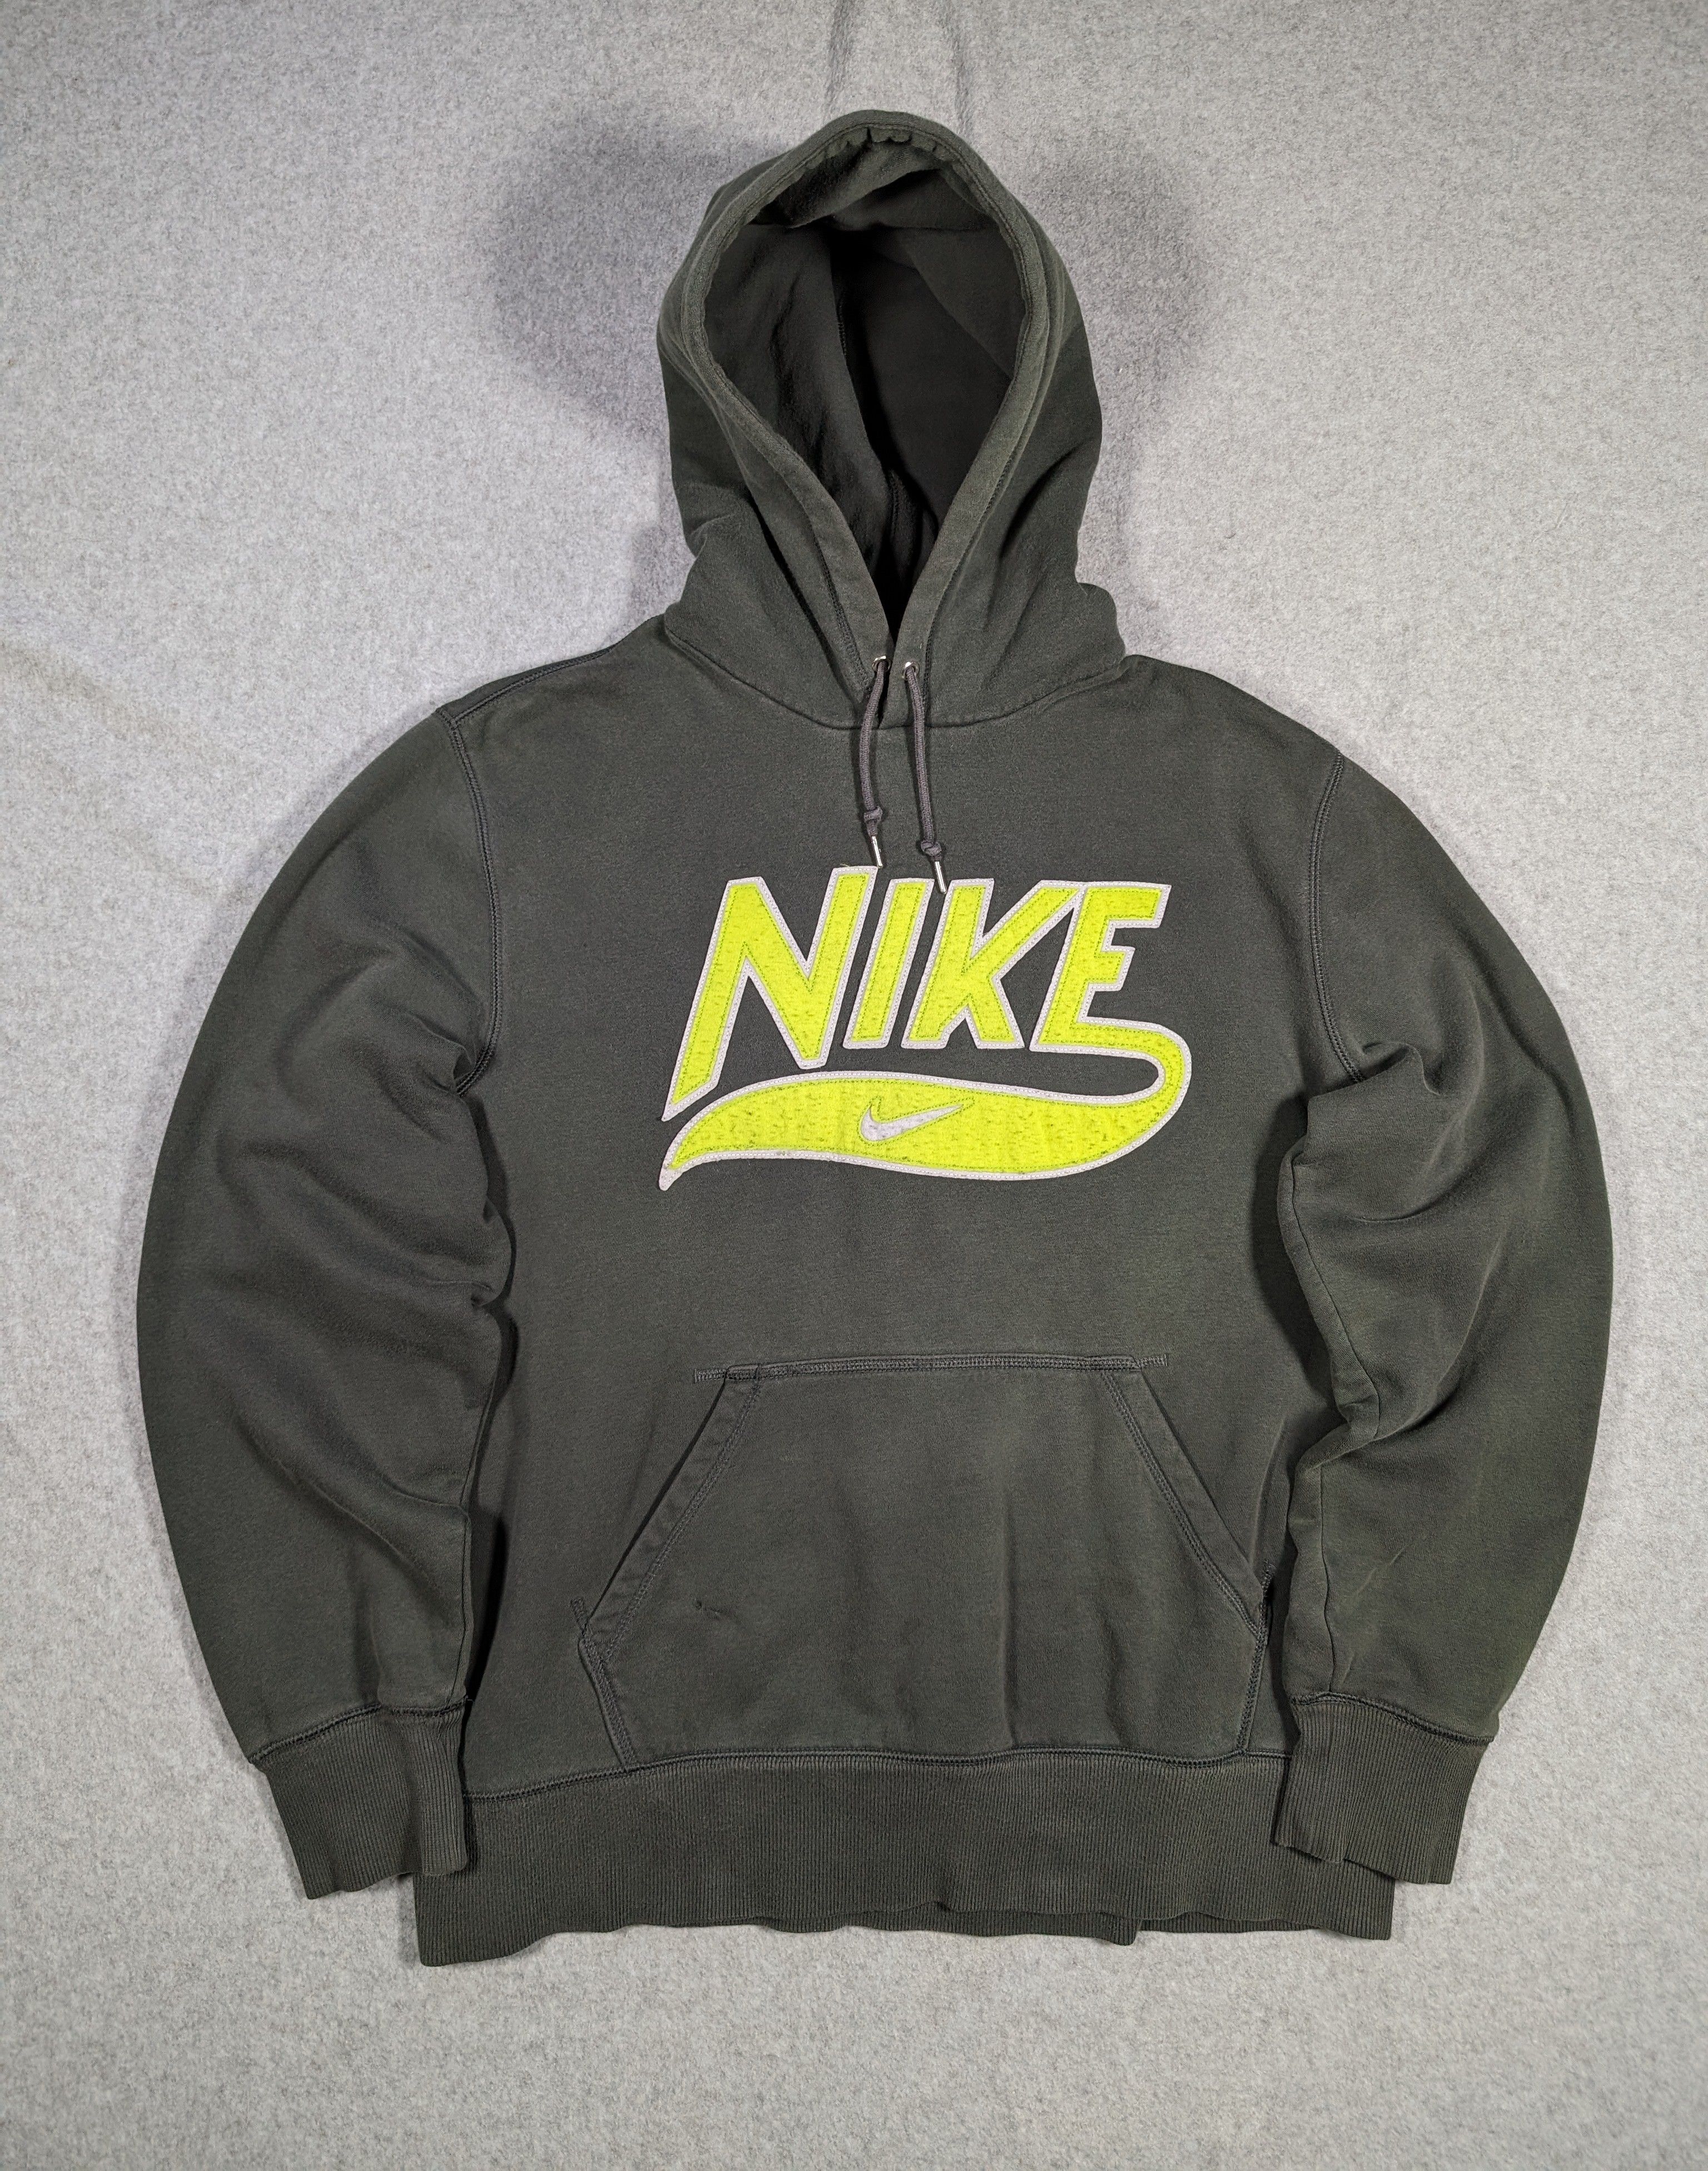 Pre-owned Hype X Nike Vintage Nike Center Swoosh Hoodie Earth Tone Brown Faded